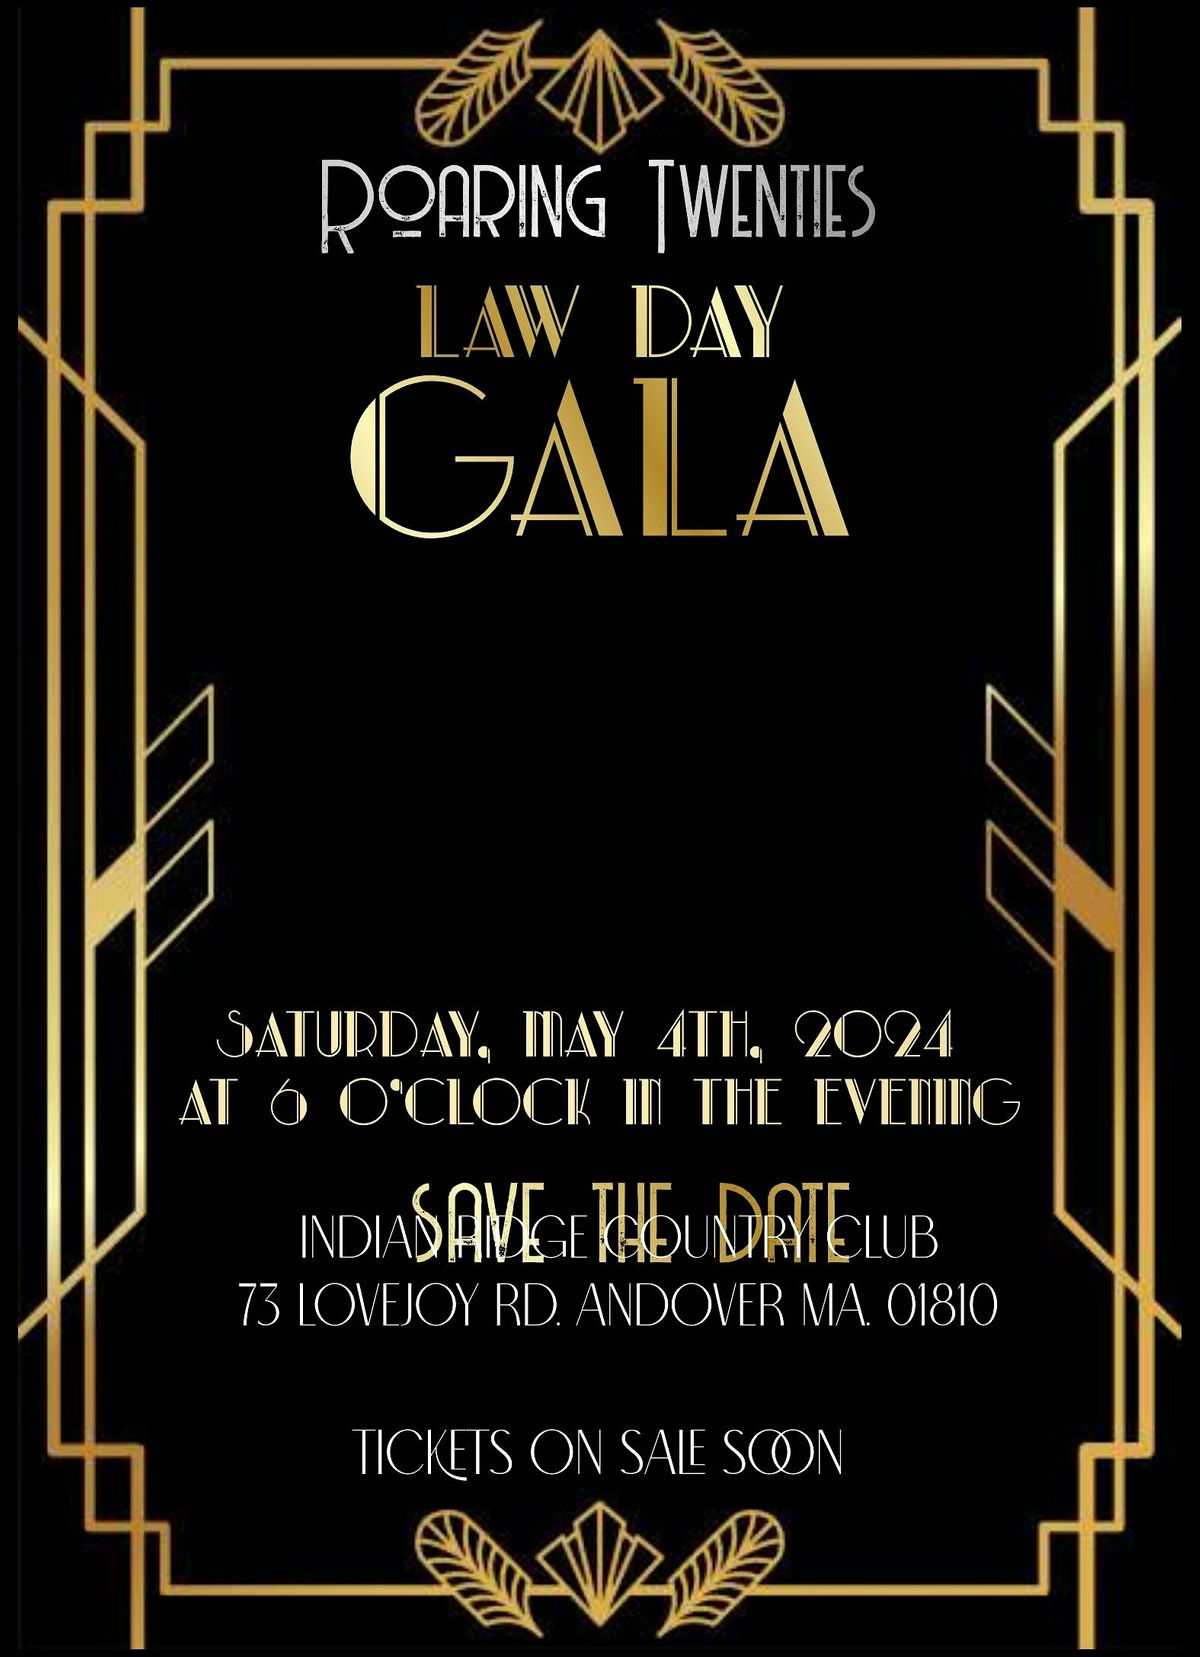 MSL Law Day Gala 2024